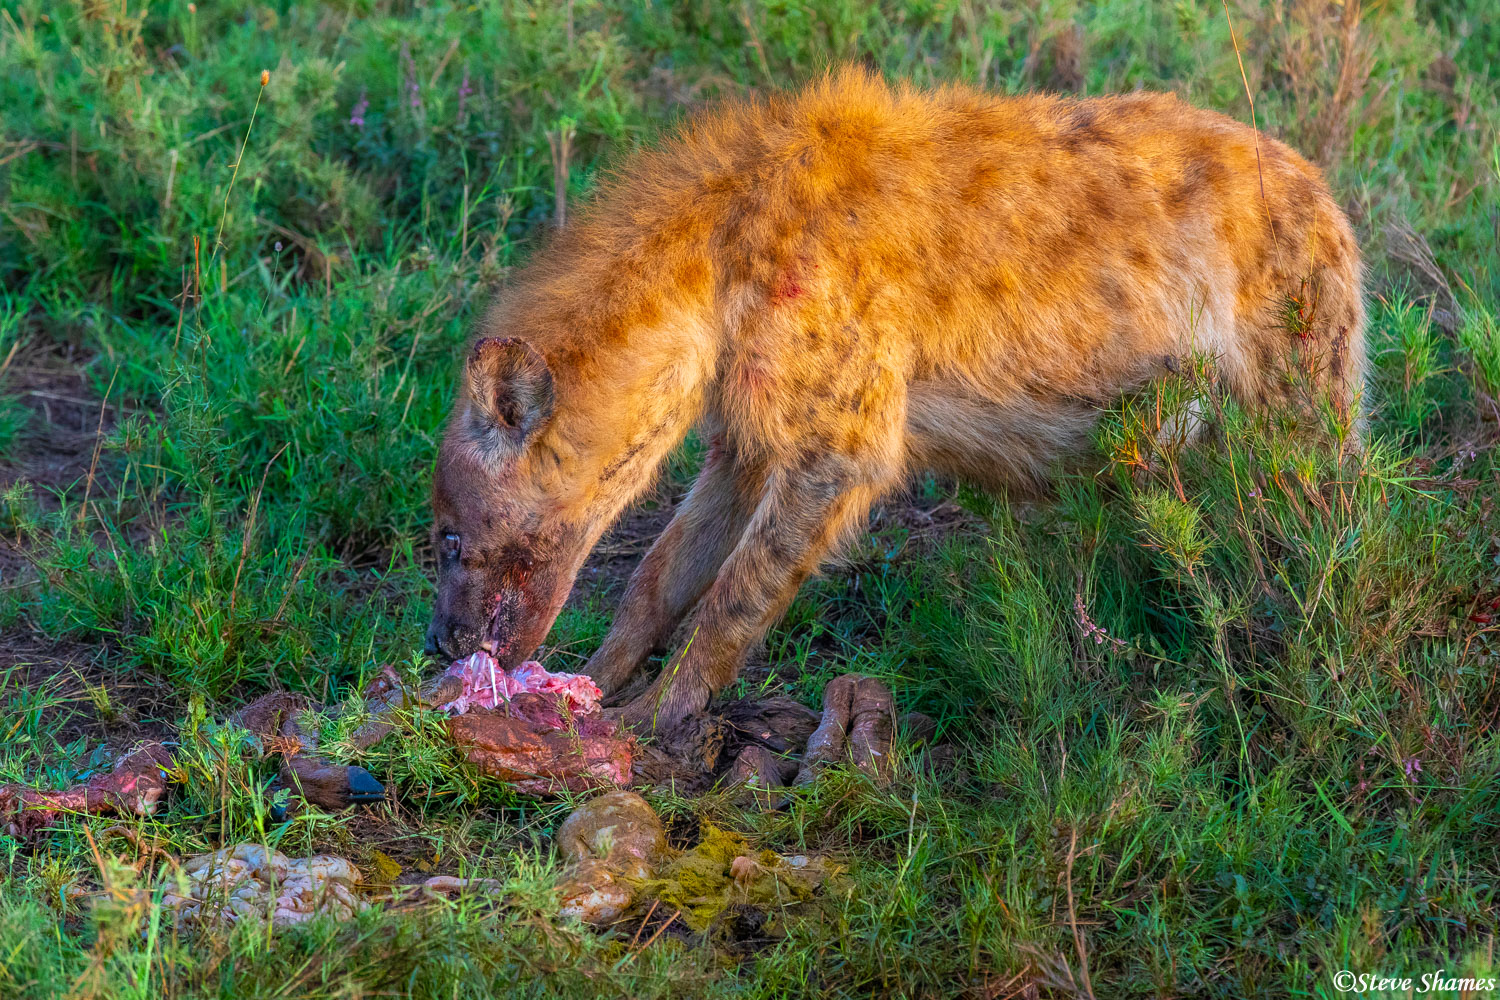 A hyena finishing up some scraps in the first light of the day.